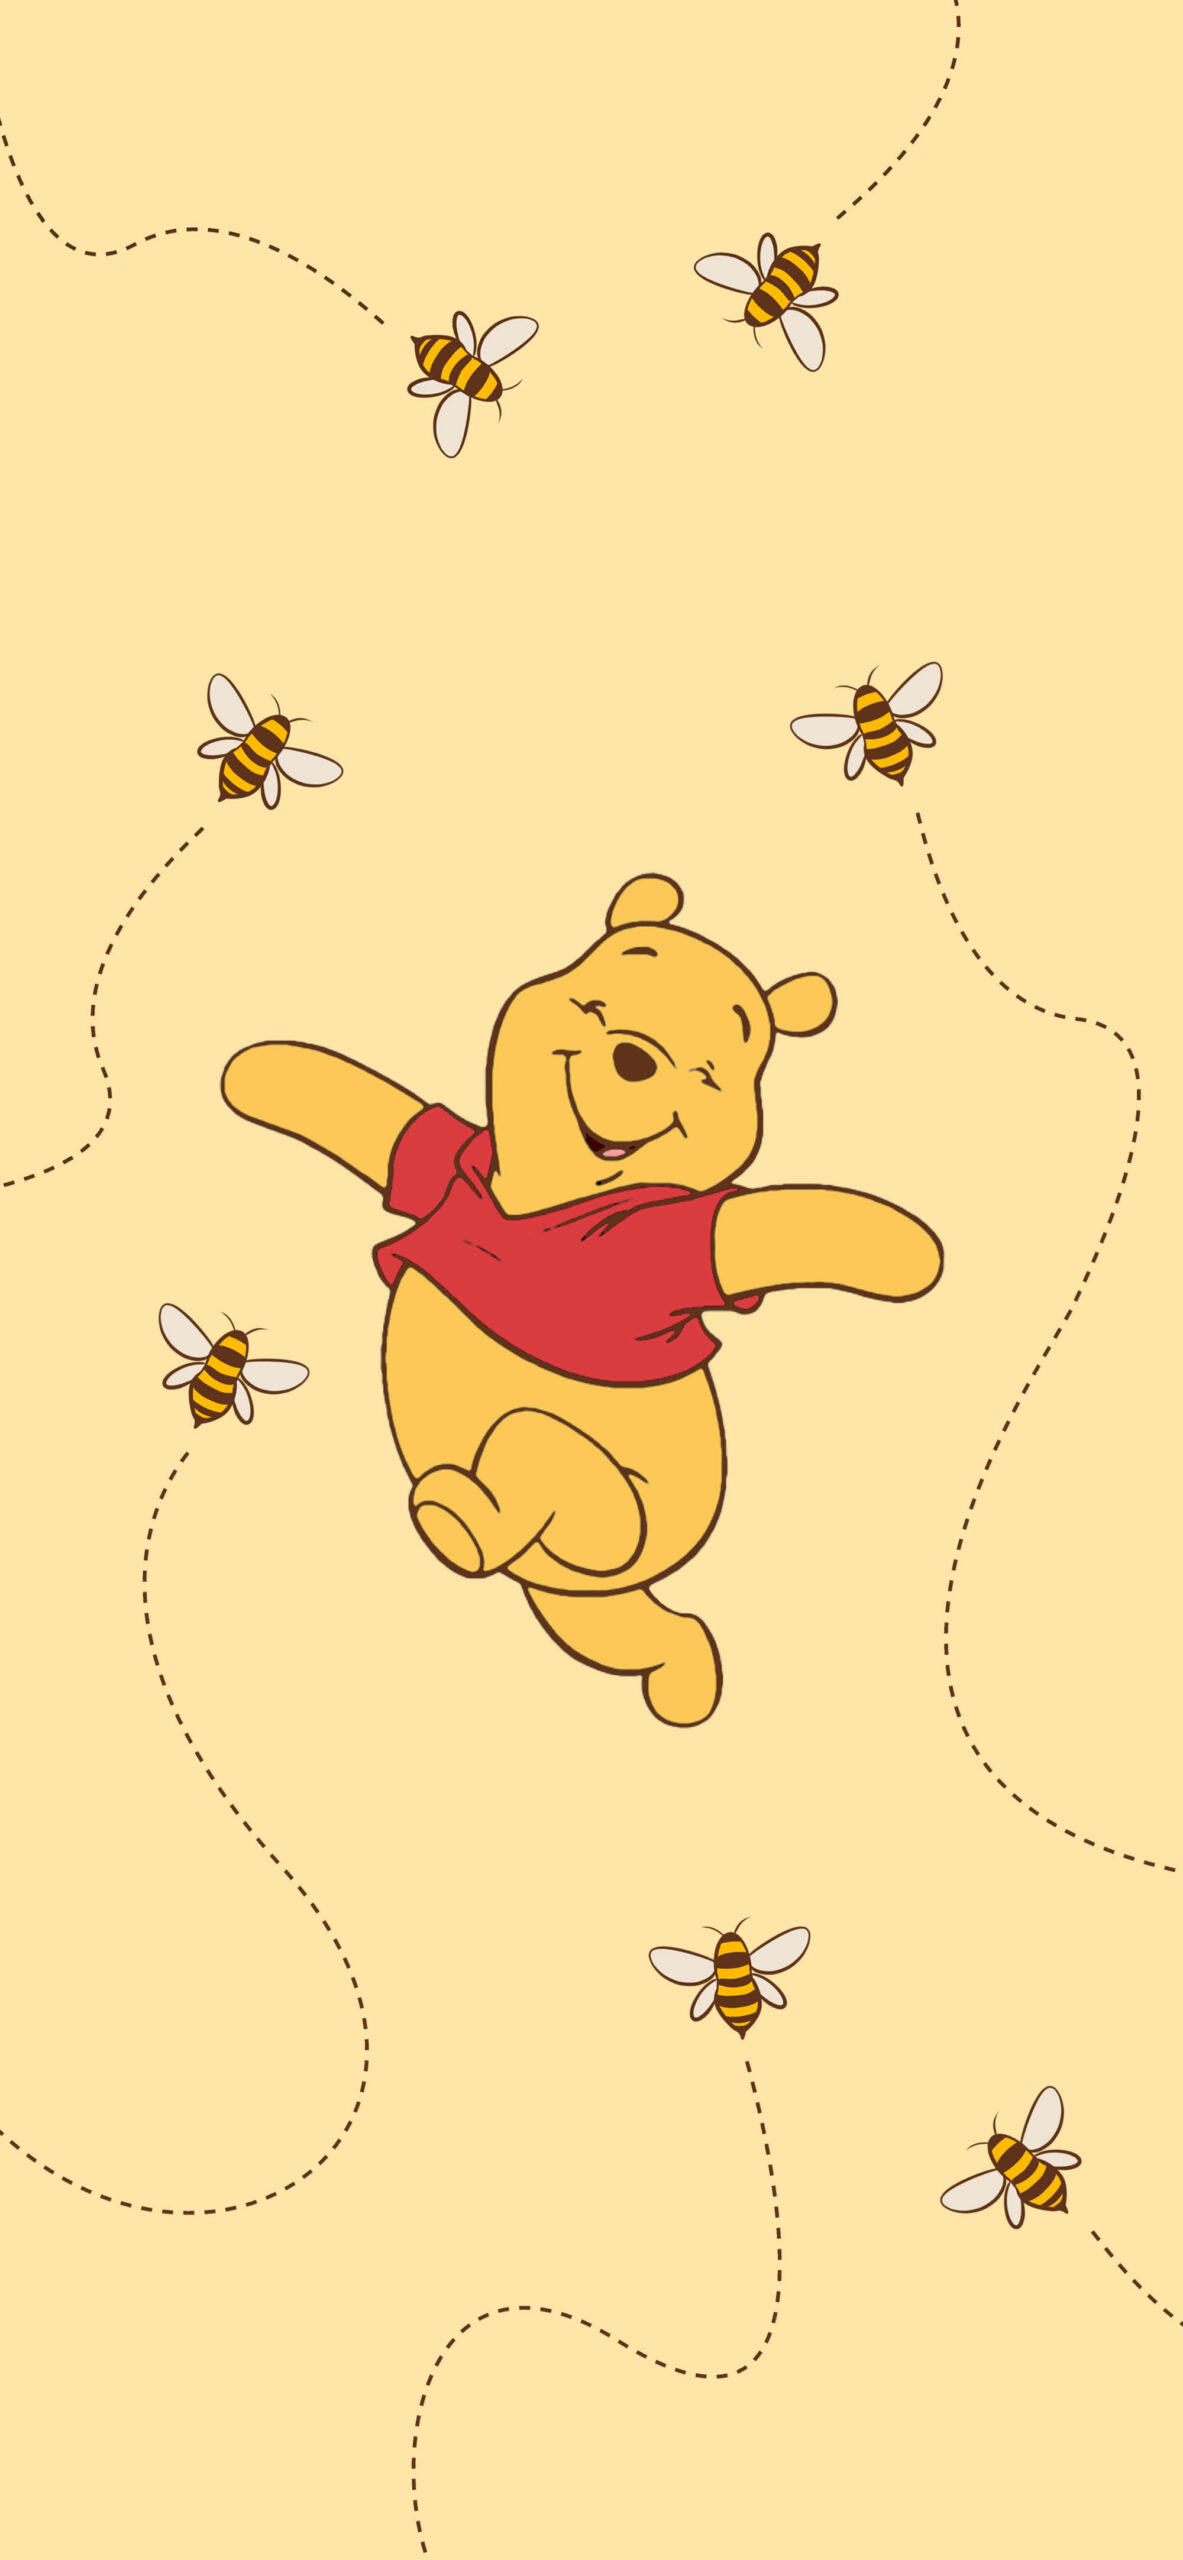 Winnie the Pooh Yellow Wallpaper the Pooh Wallpaper